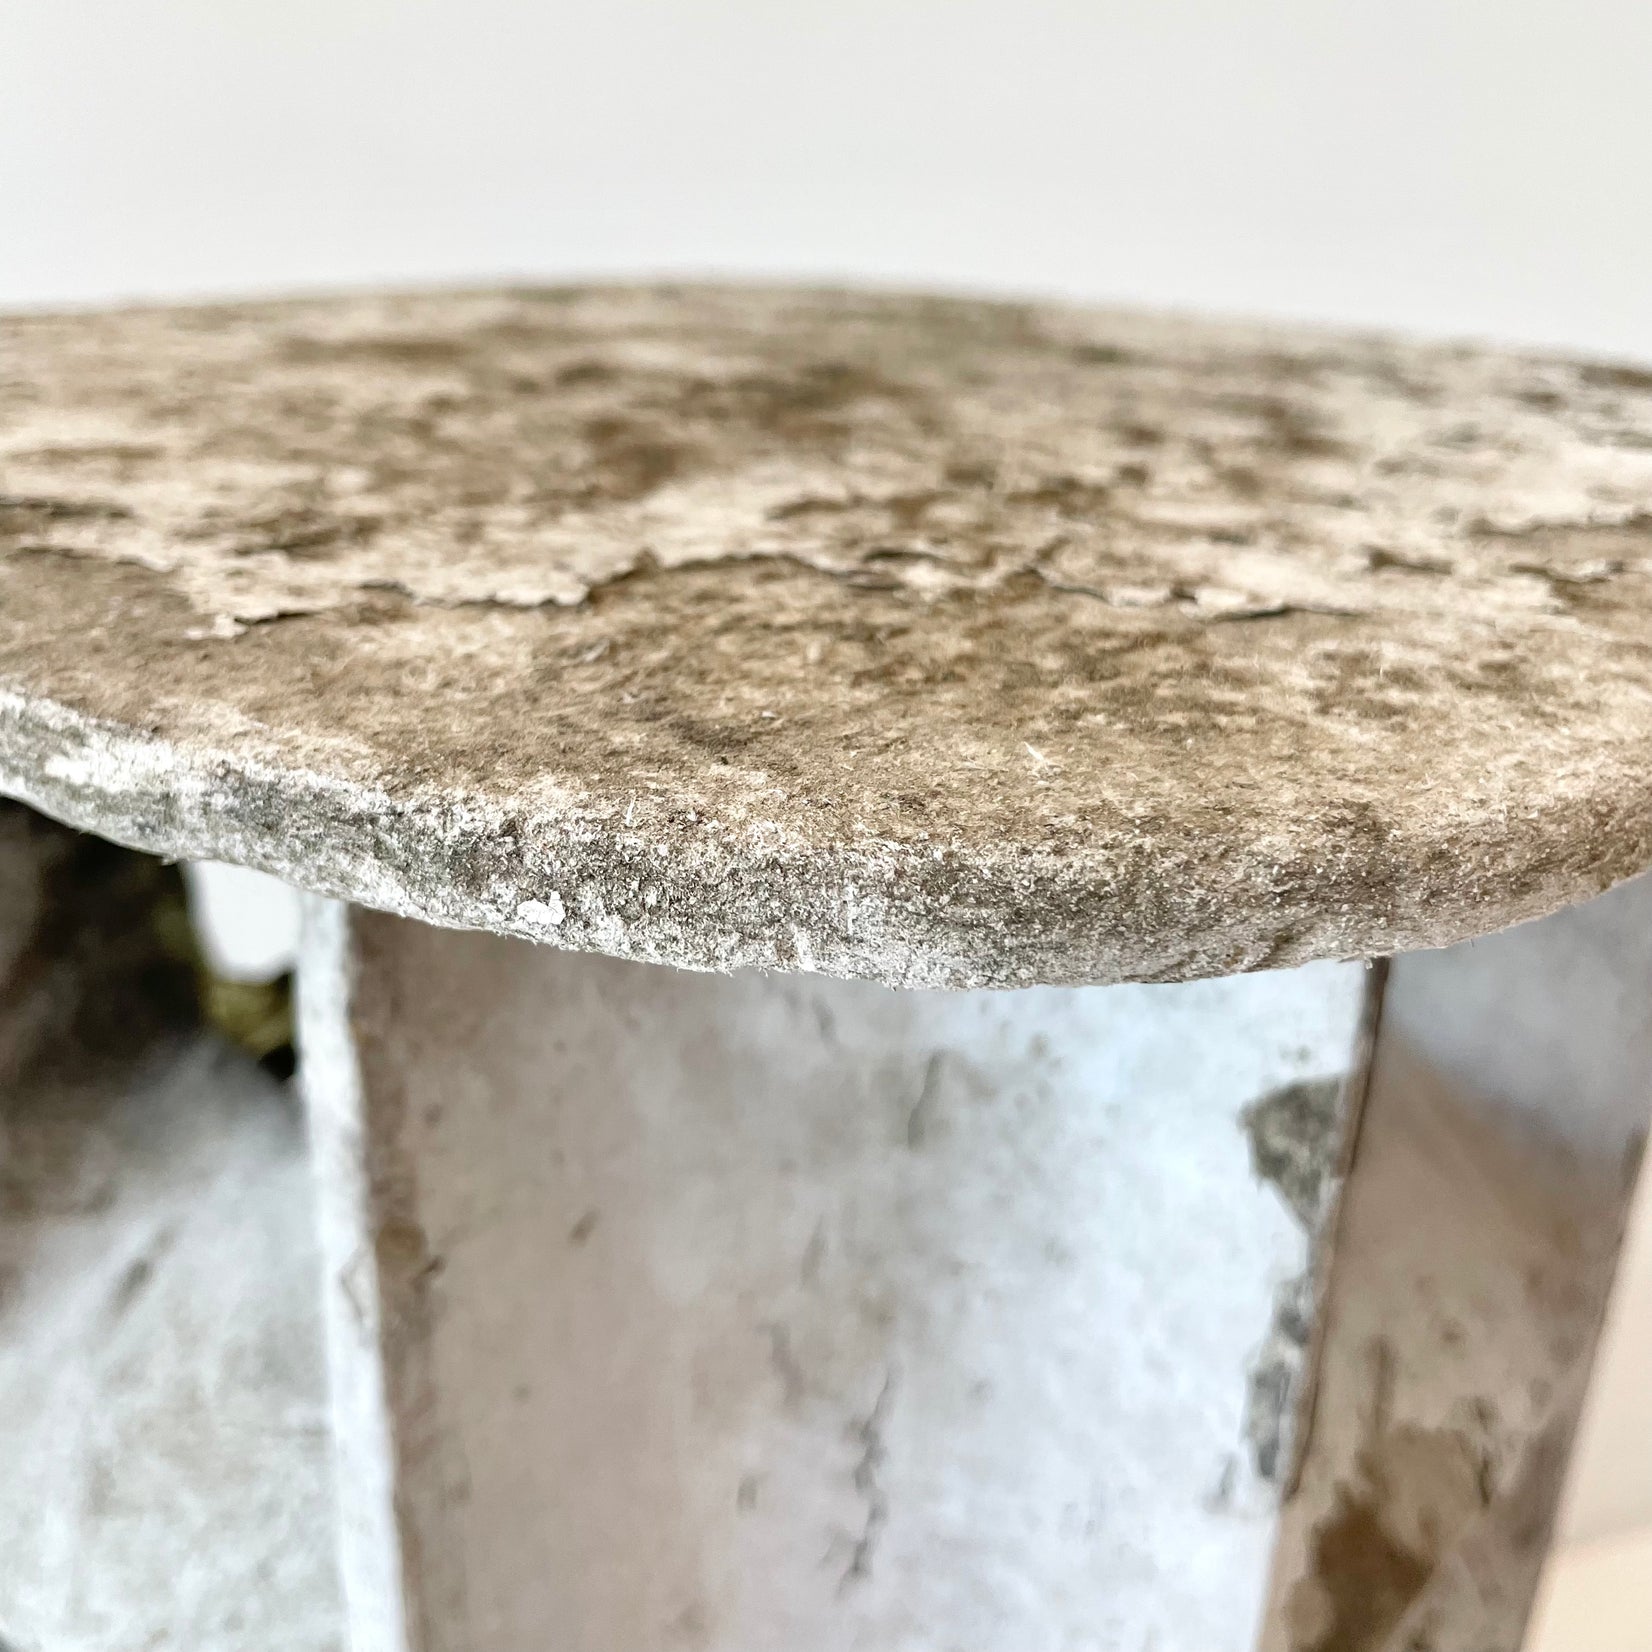 Willy Guhl Light Up Concrete Side Table, 1960s Switzerland